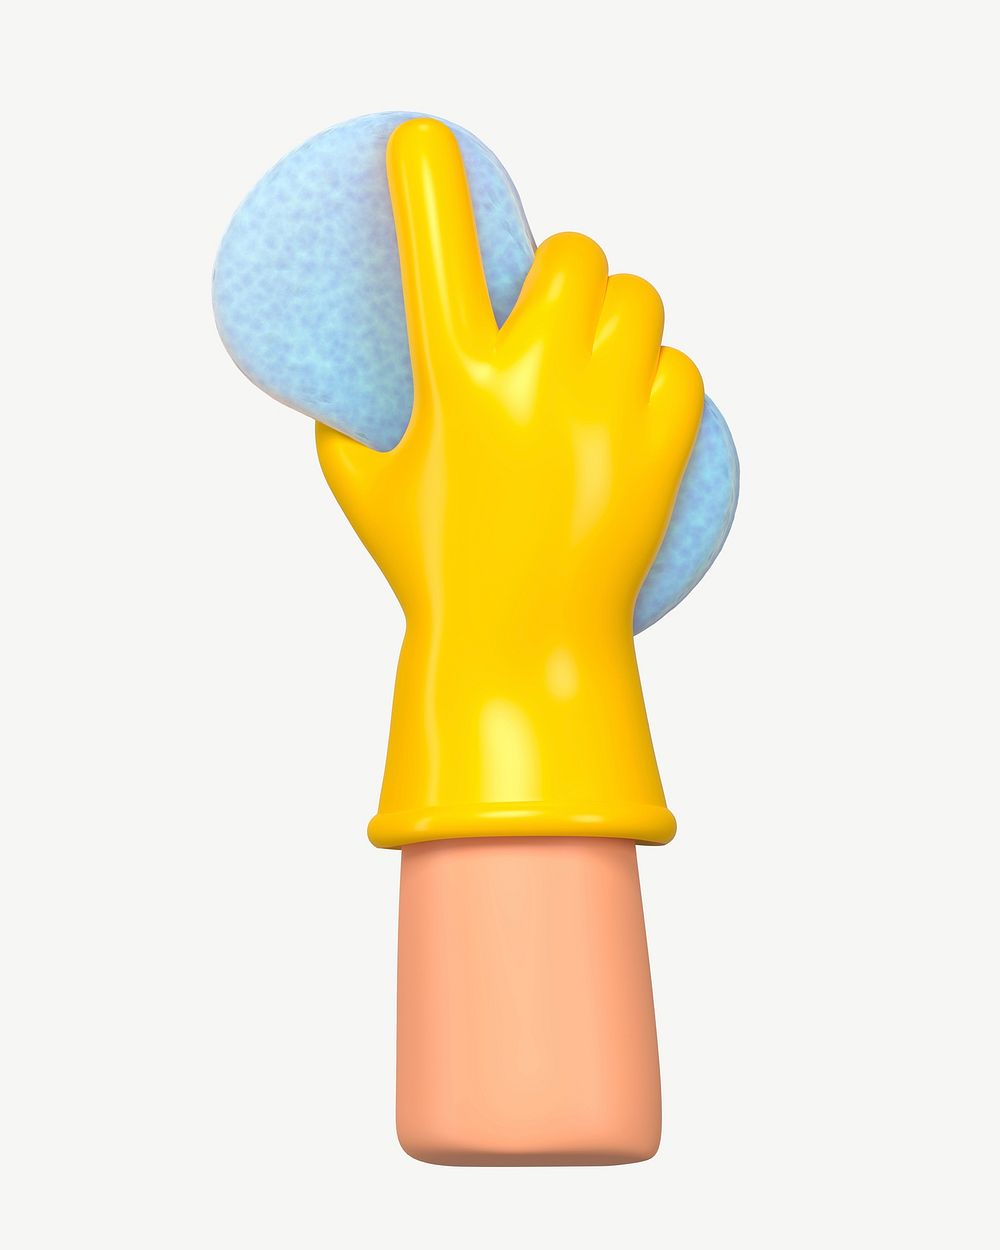 3D hand using cleaning sponge, collage element psd